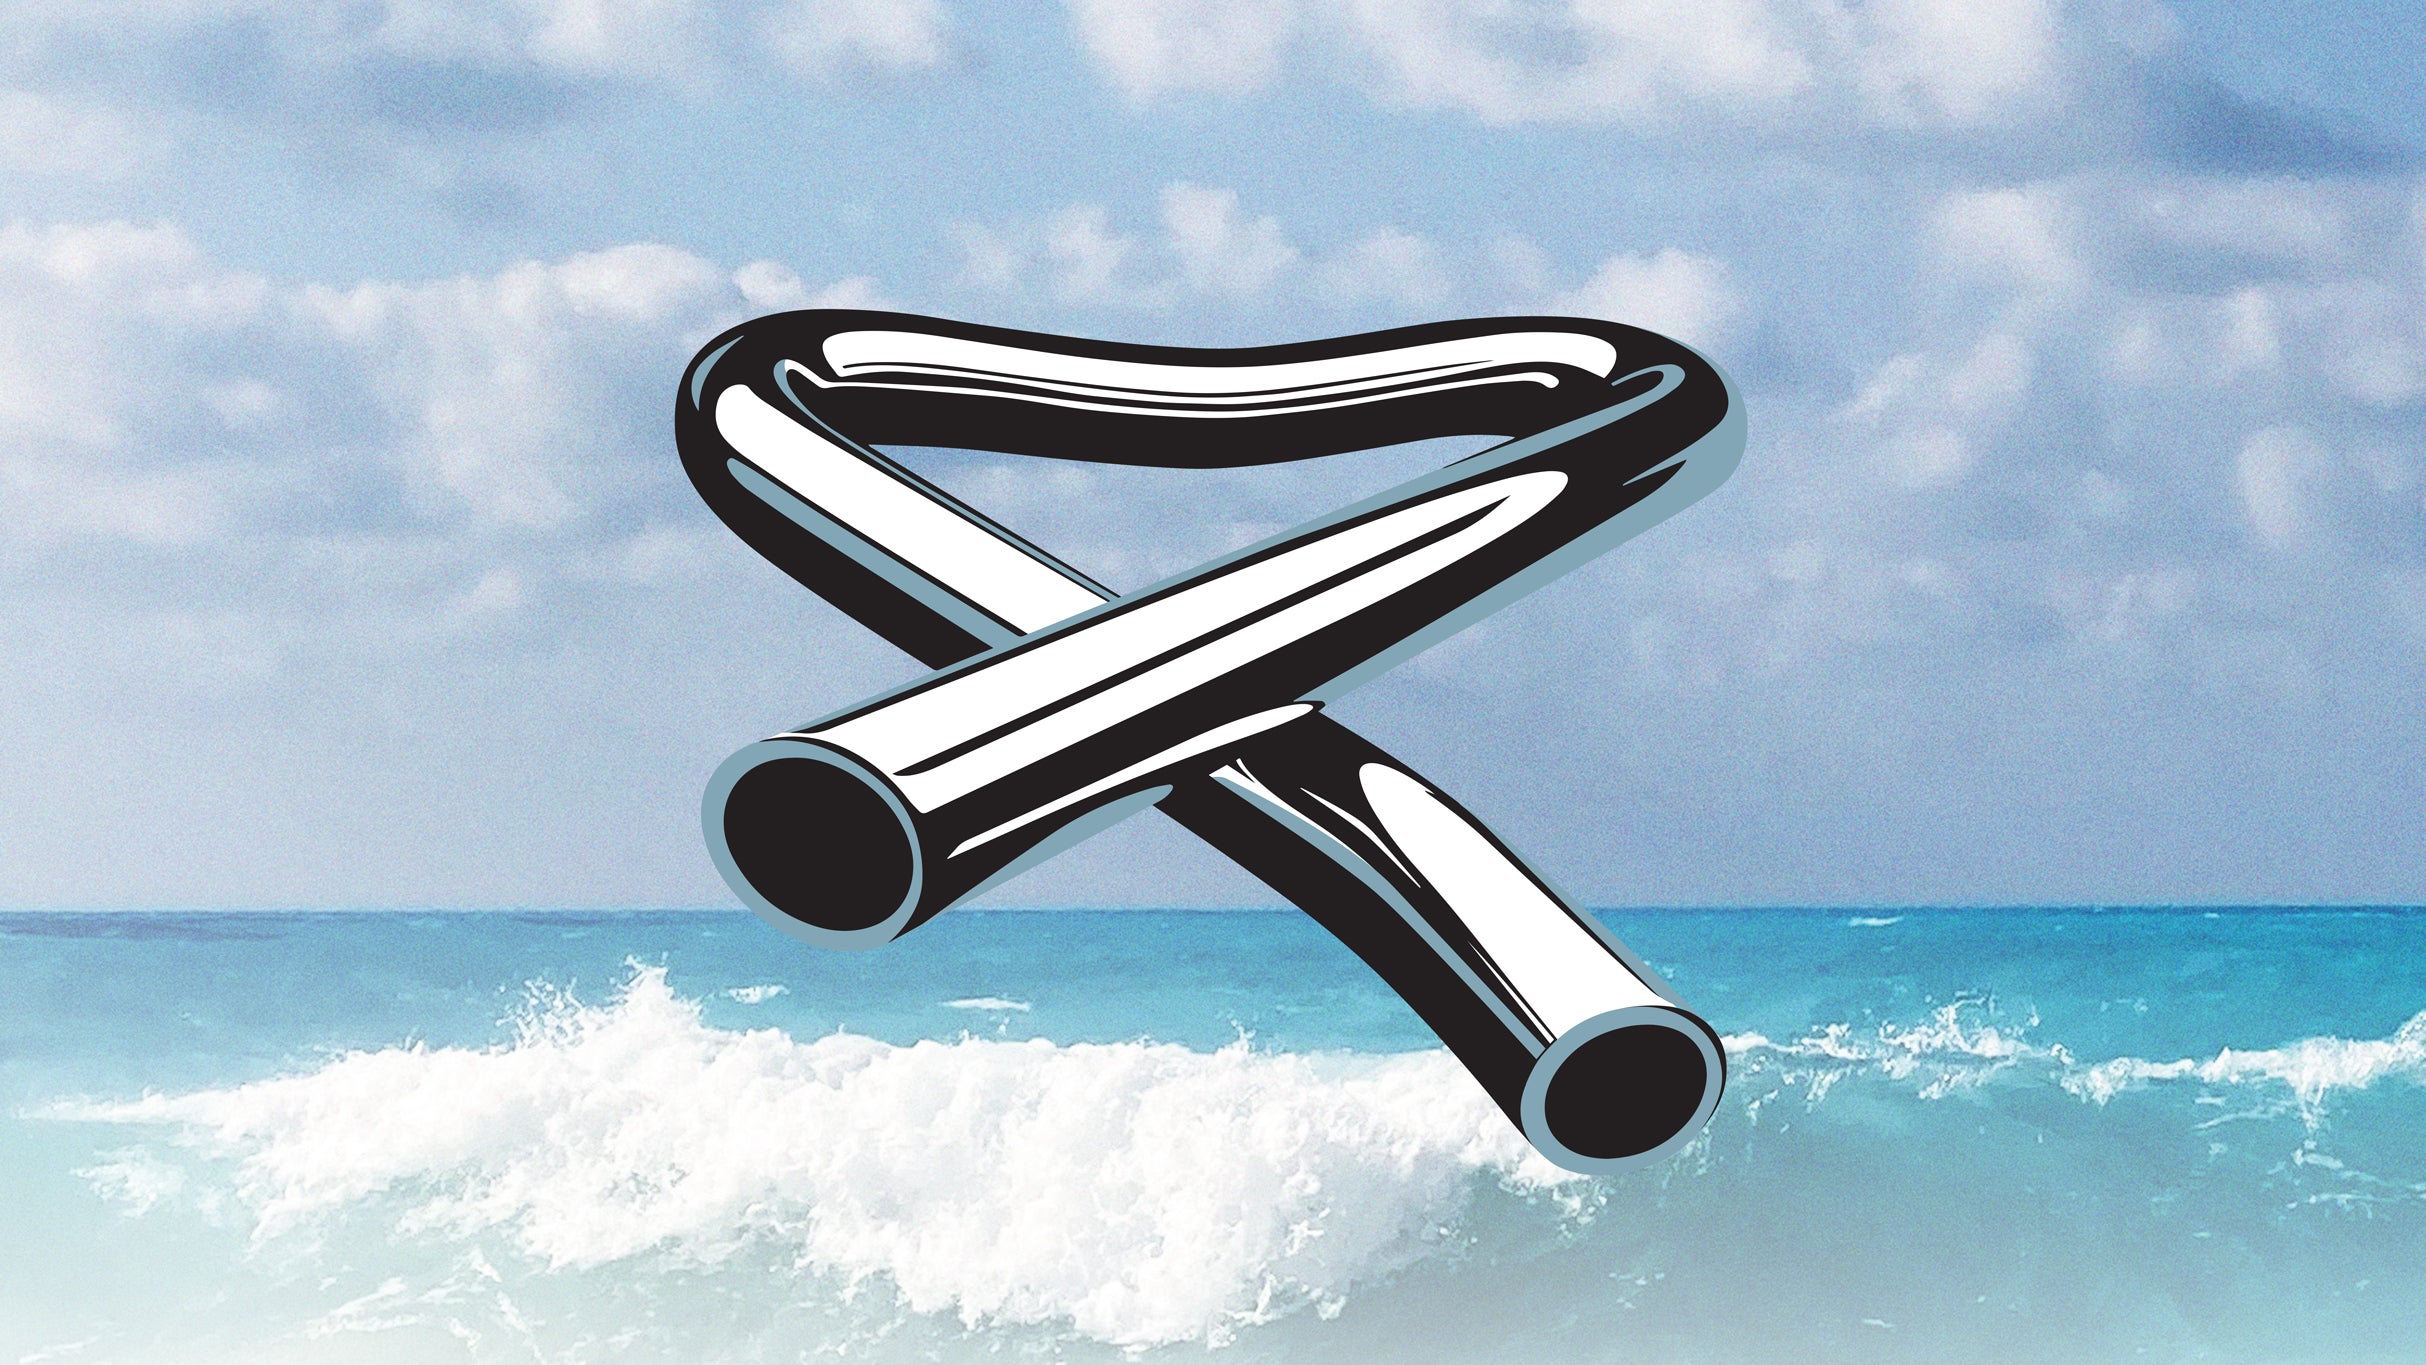 Mike Oldfield's Tubular Bells Live In Concert in Sydney promo photo for Exclusive presale offer code